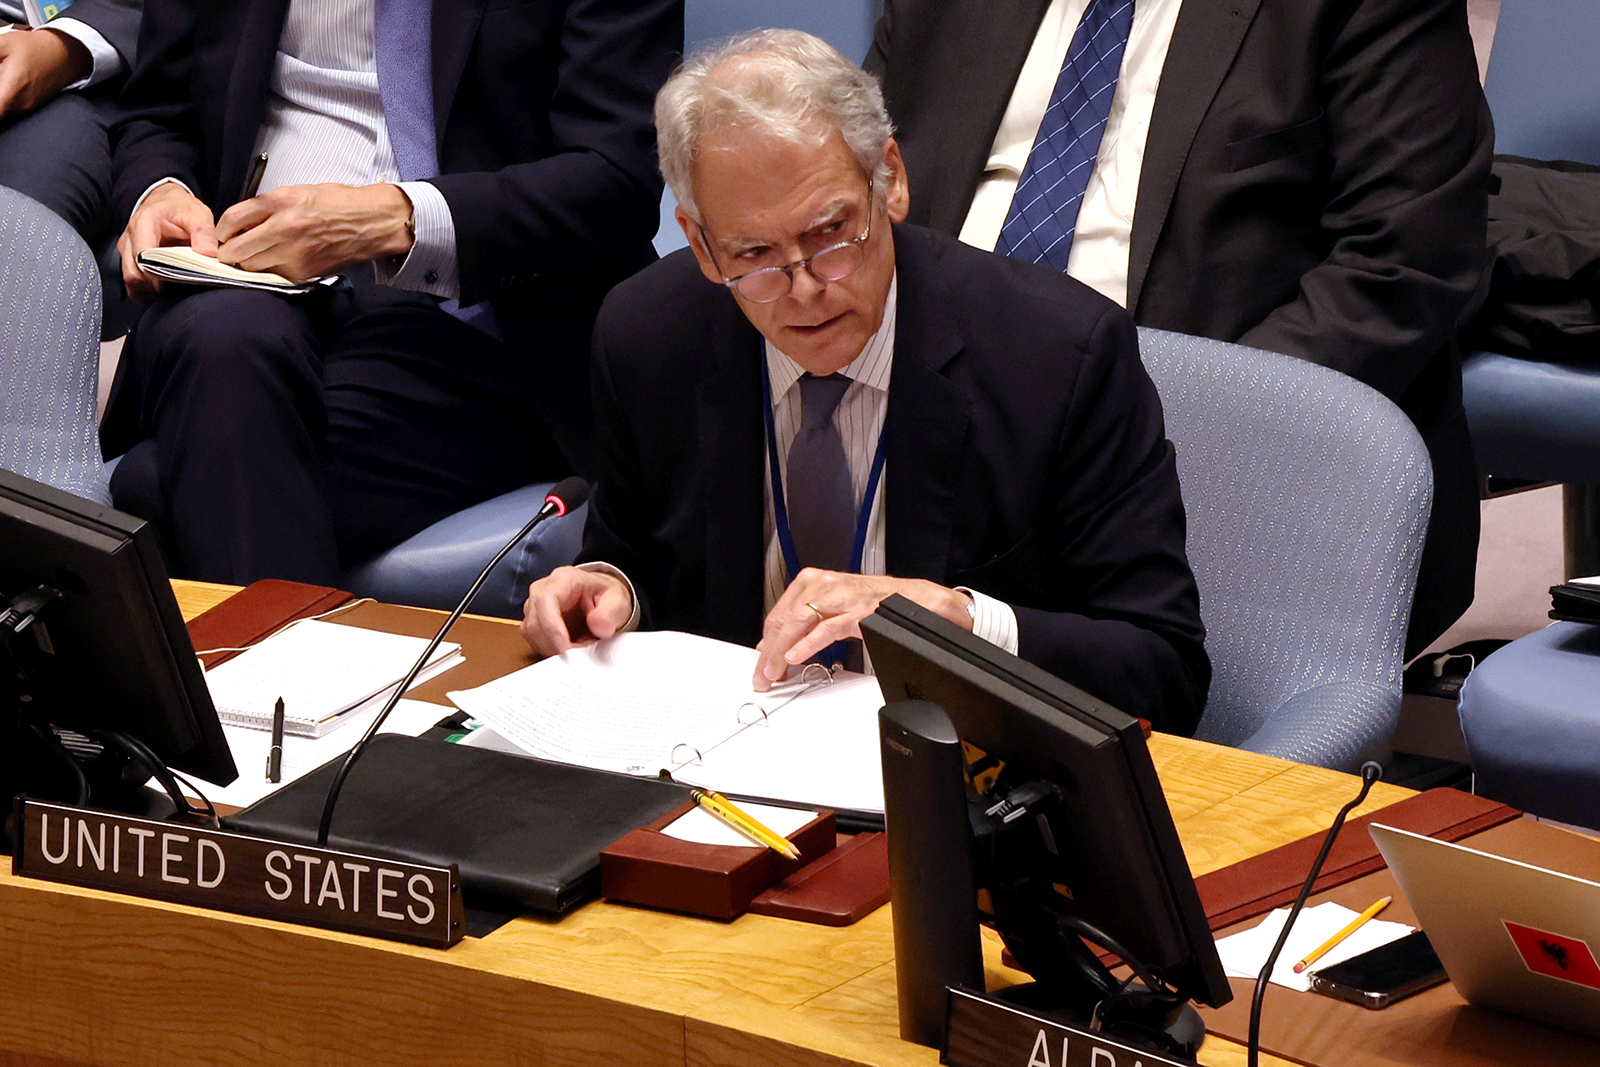 U.S. Ambassador for Special Political Affairs, Jeffrey DeLaurentis, speaks during a U.N. Security Council meeting at the United Nations Headquarters in New York, Unites on September 6, 2022 in New York City. 